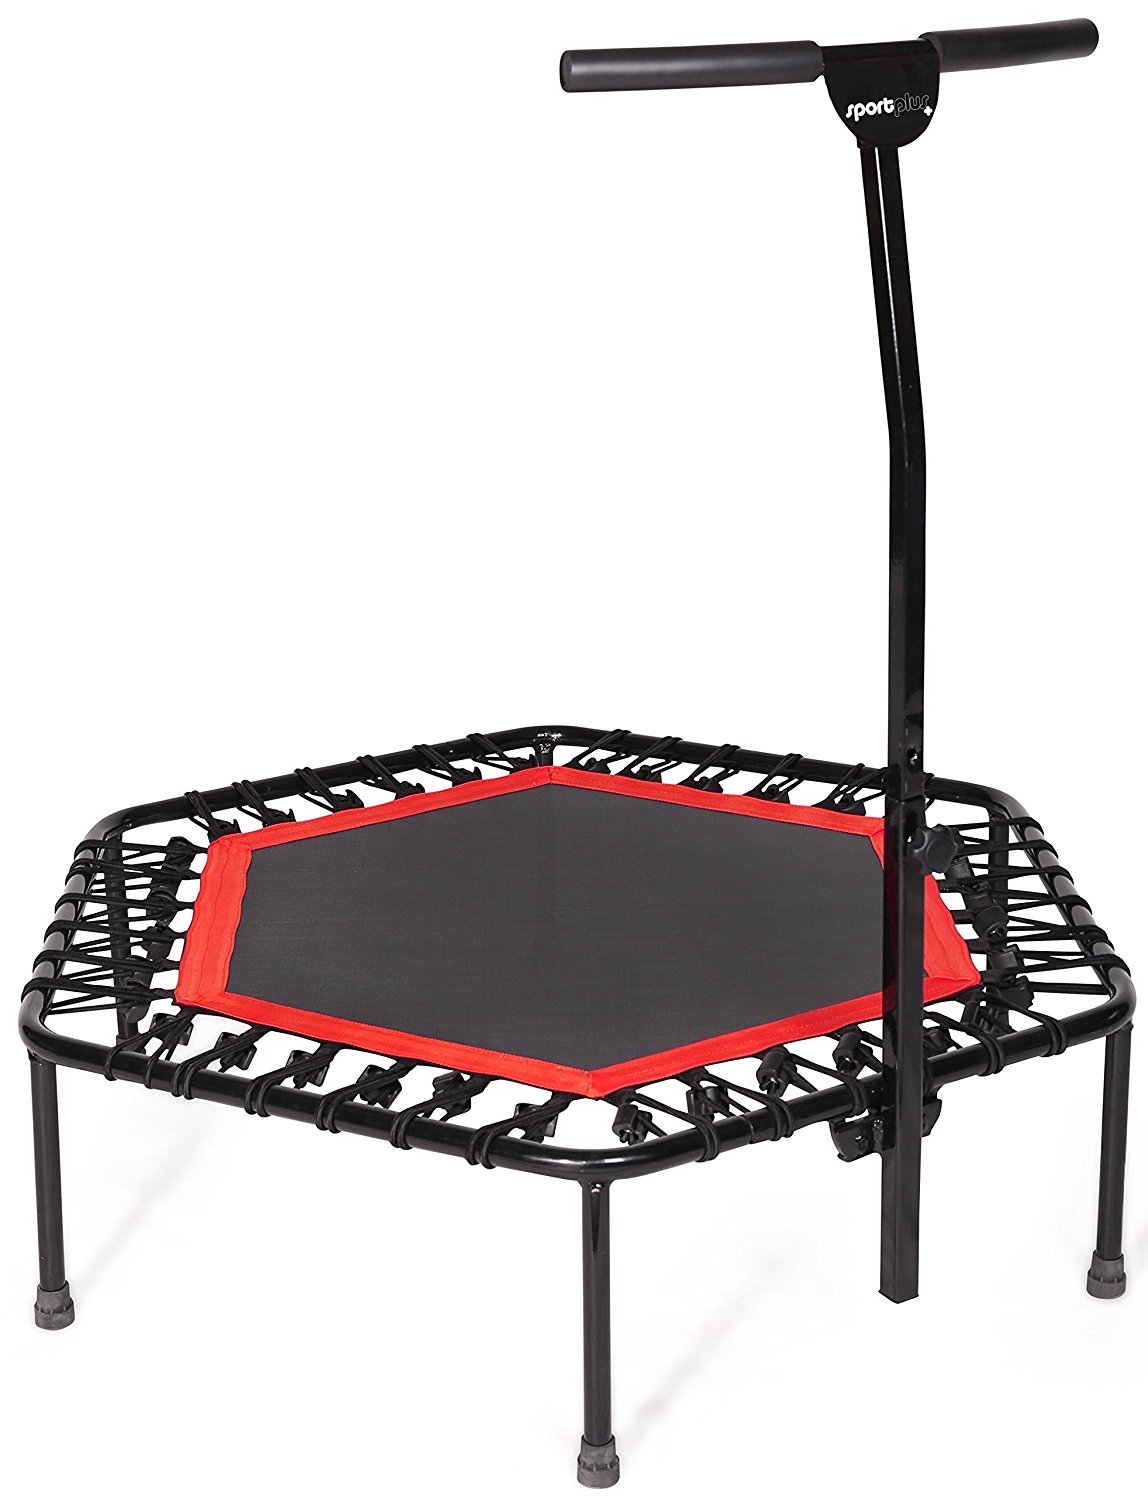 Jumping fitness home trampolin - Der absolute Favorit 